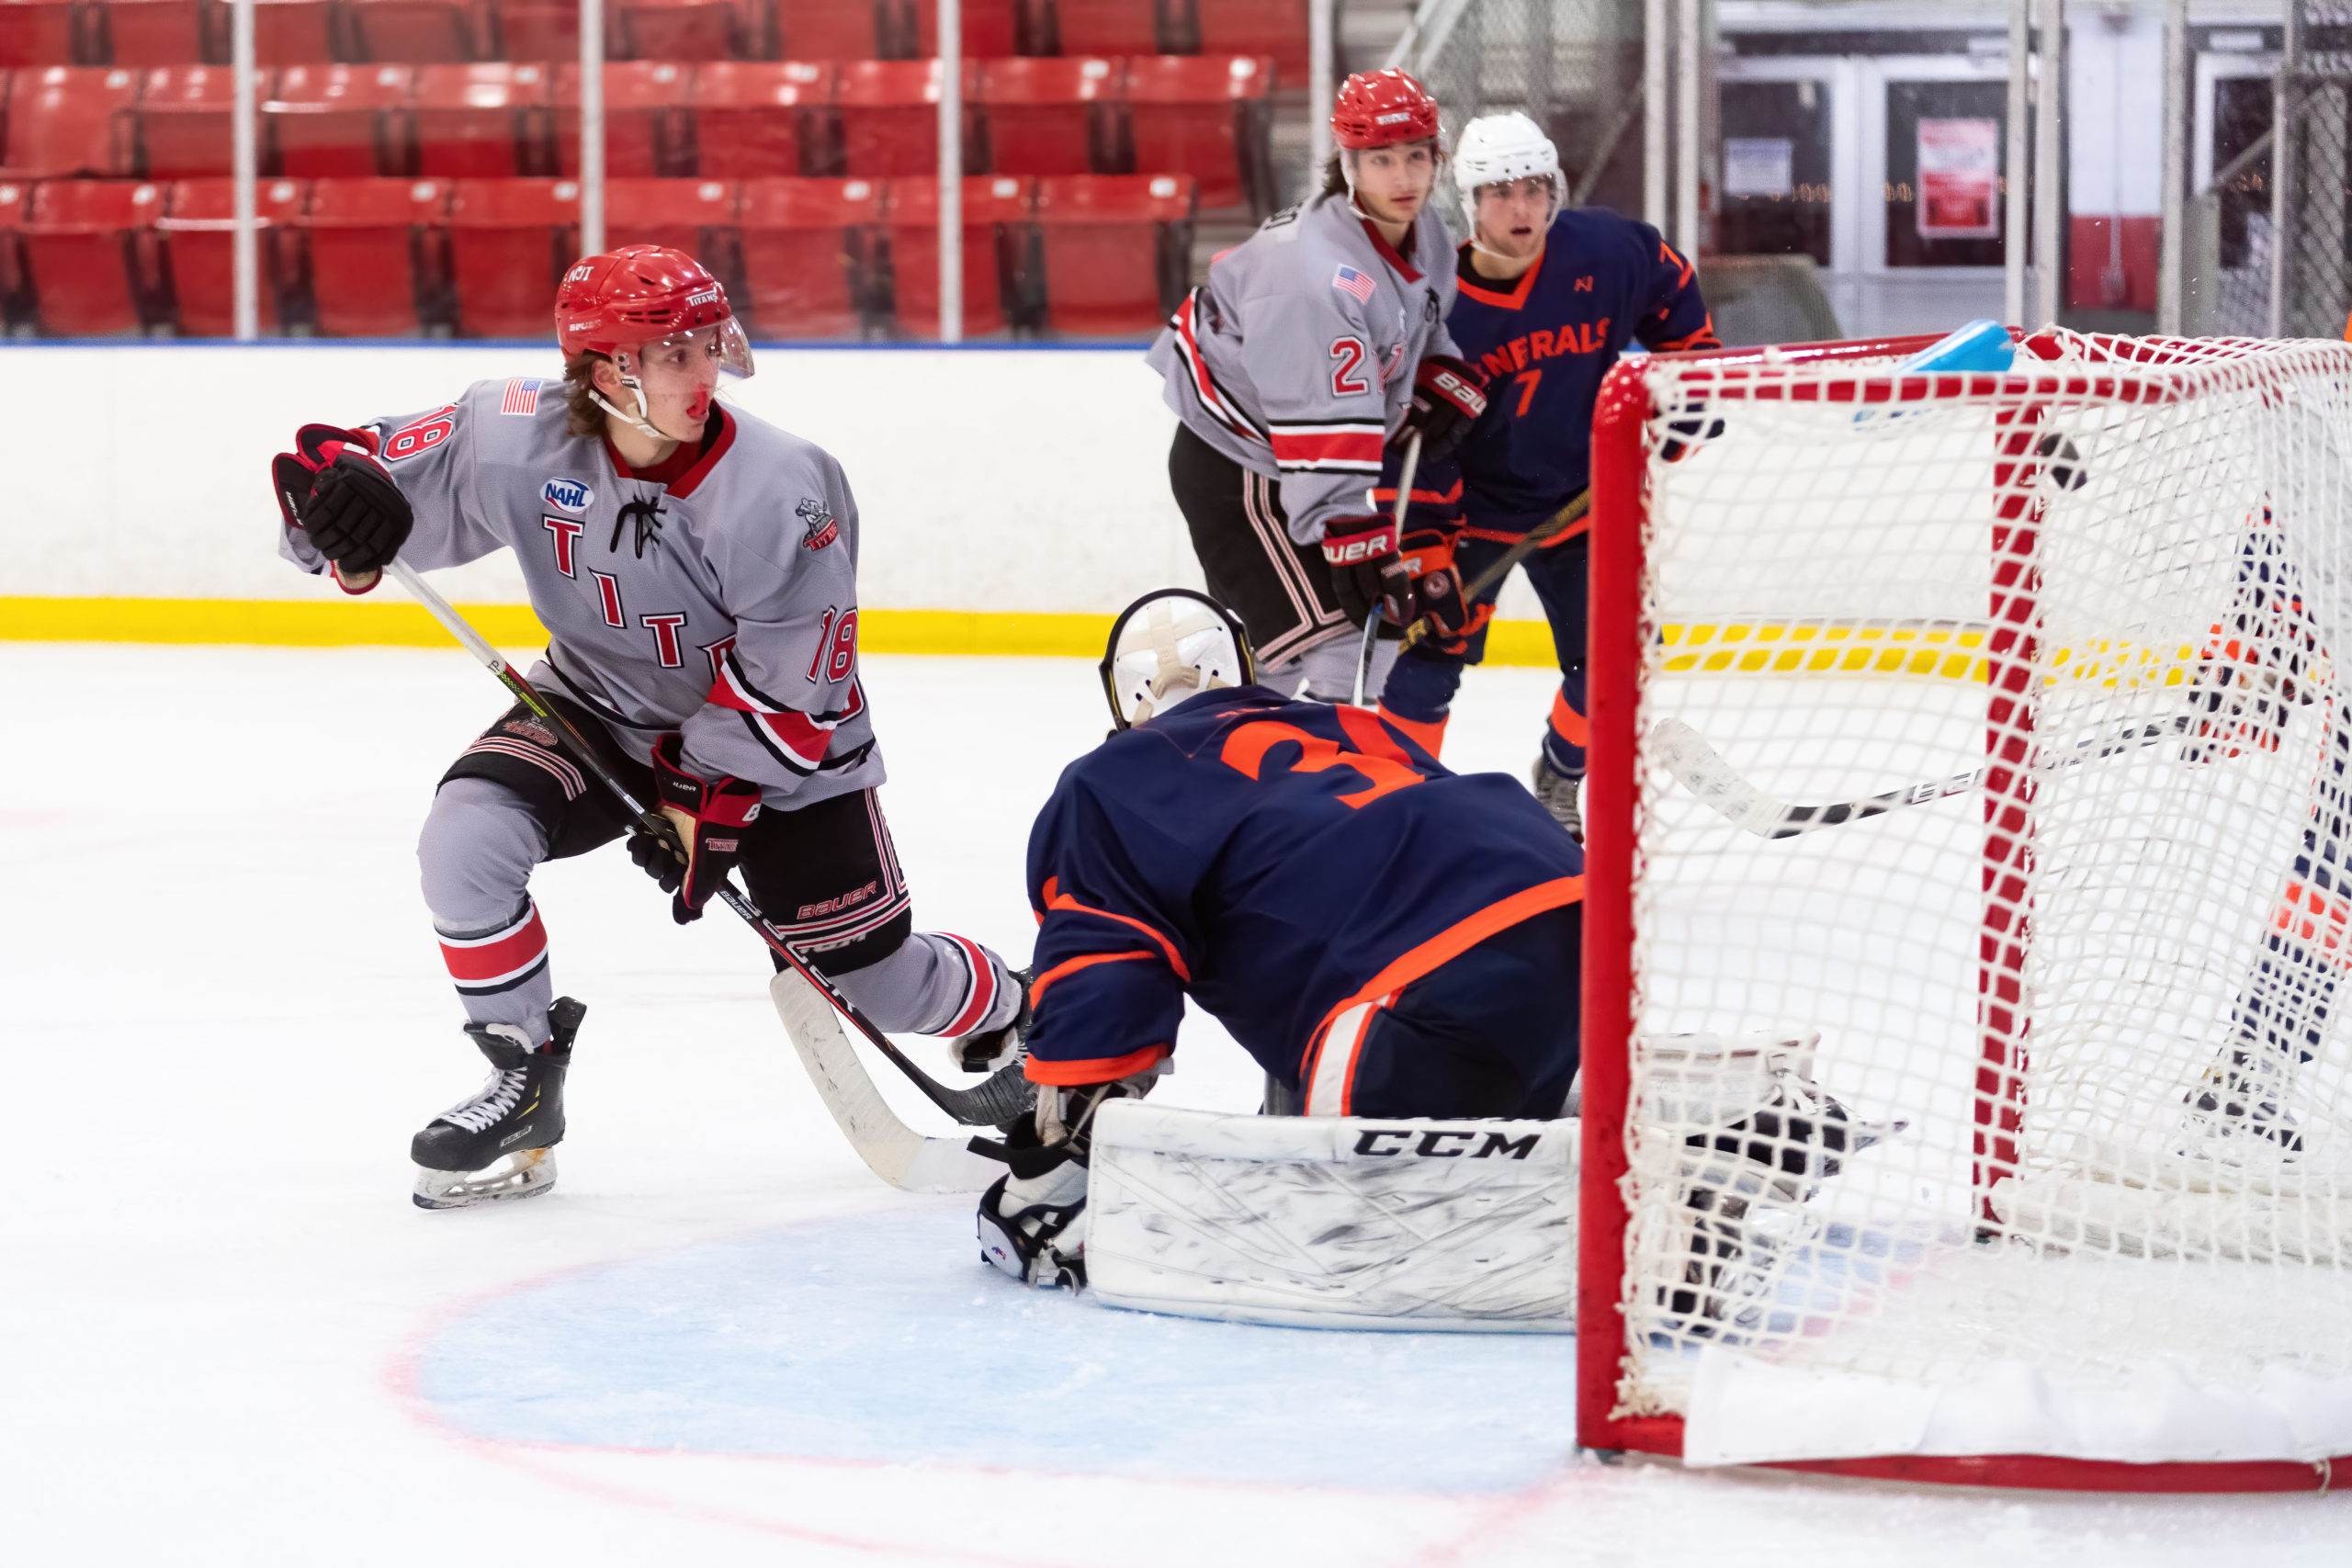 Titans fall to Generals 5 – 4 in shootout